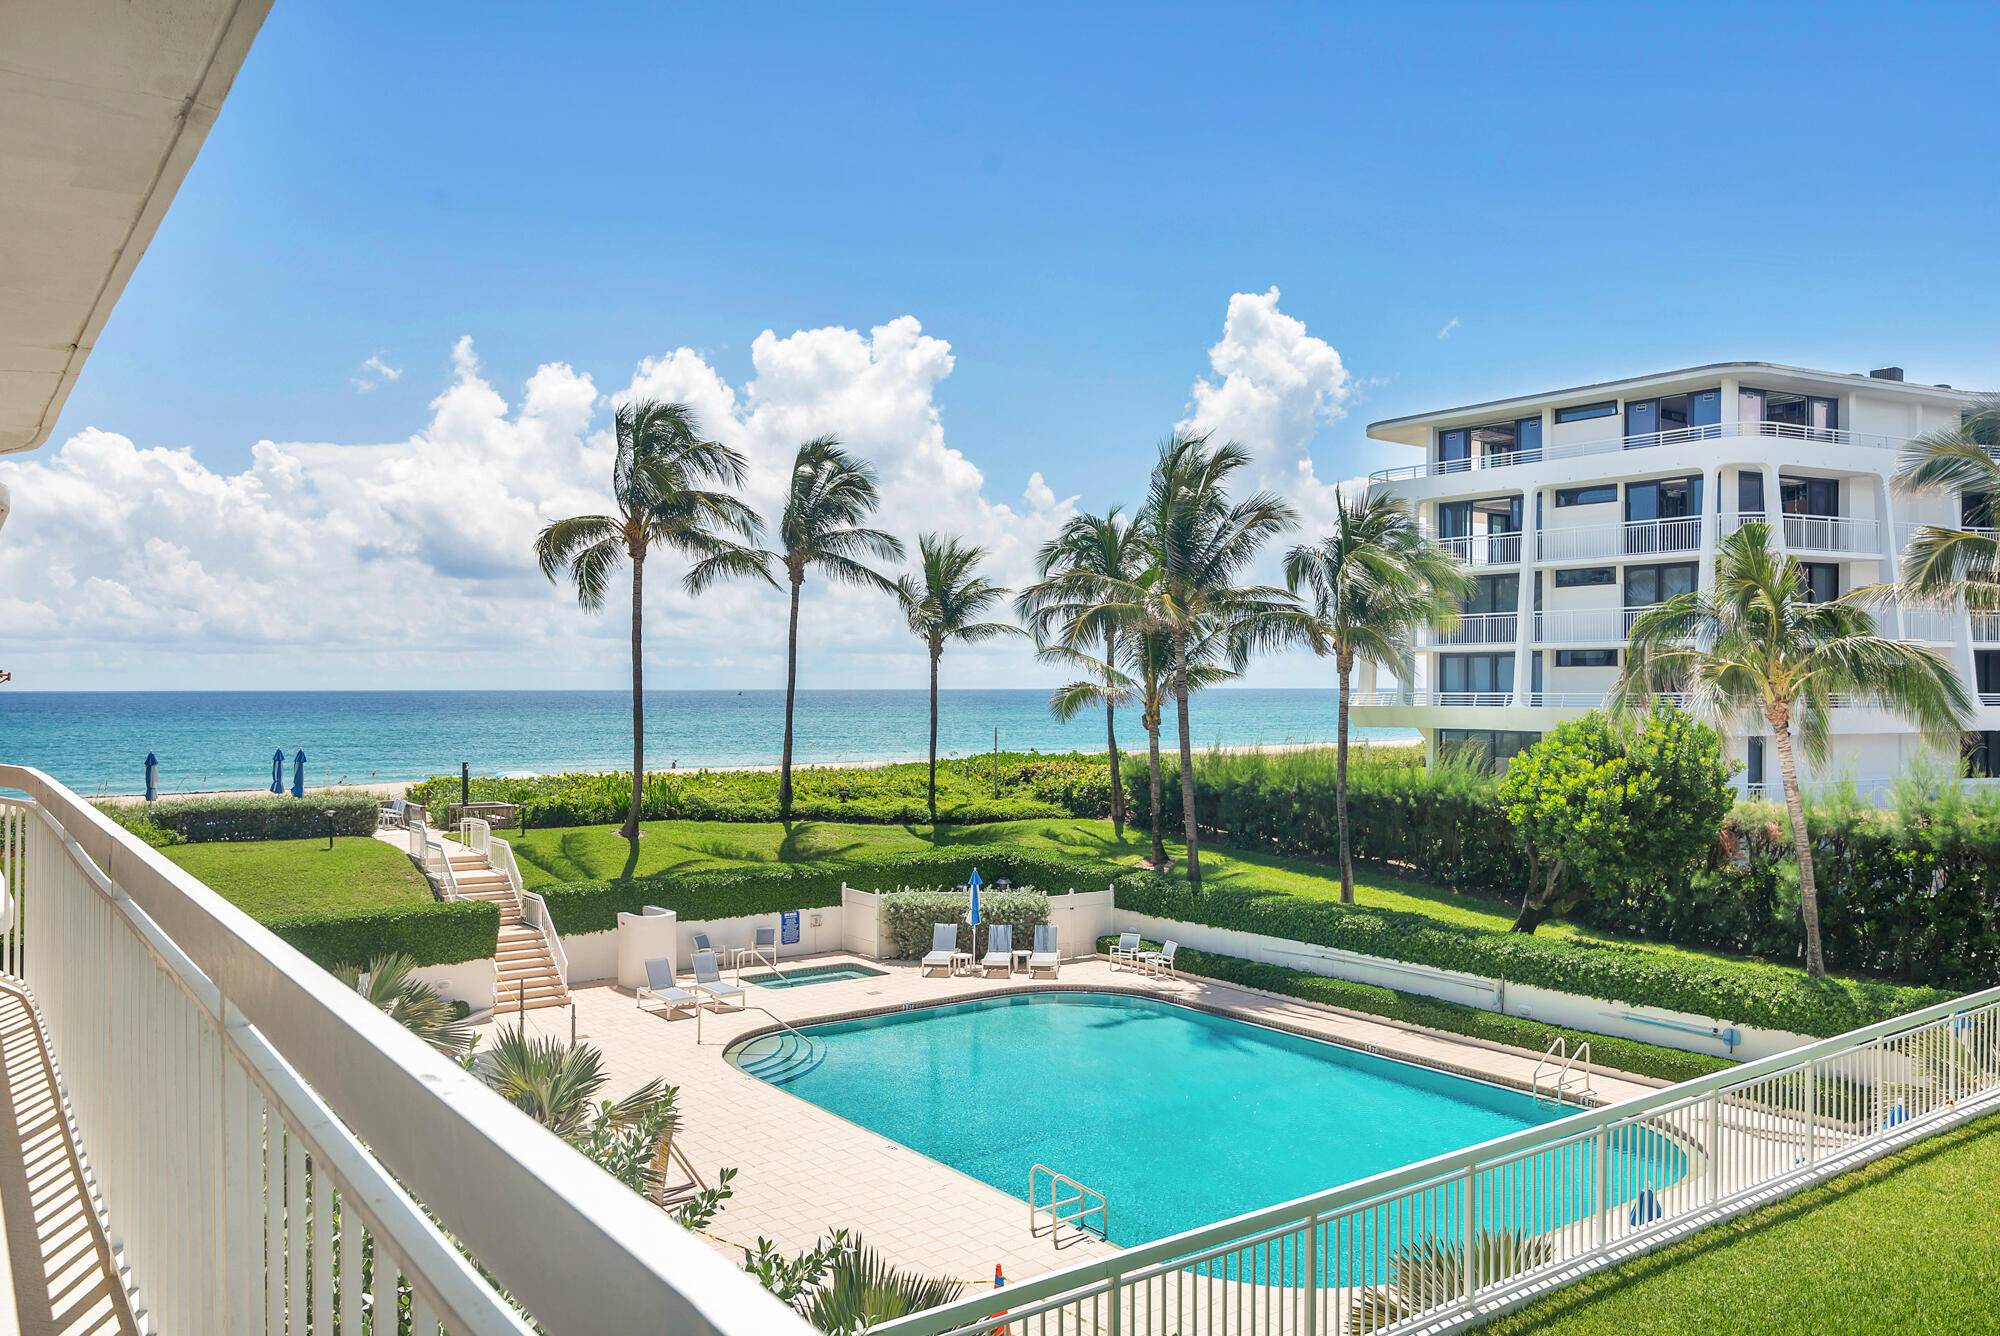 Private and exclusive oceanfront condo with 2 car garage parking.